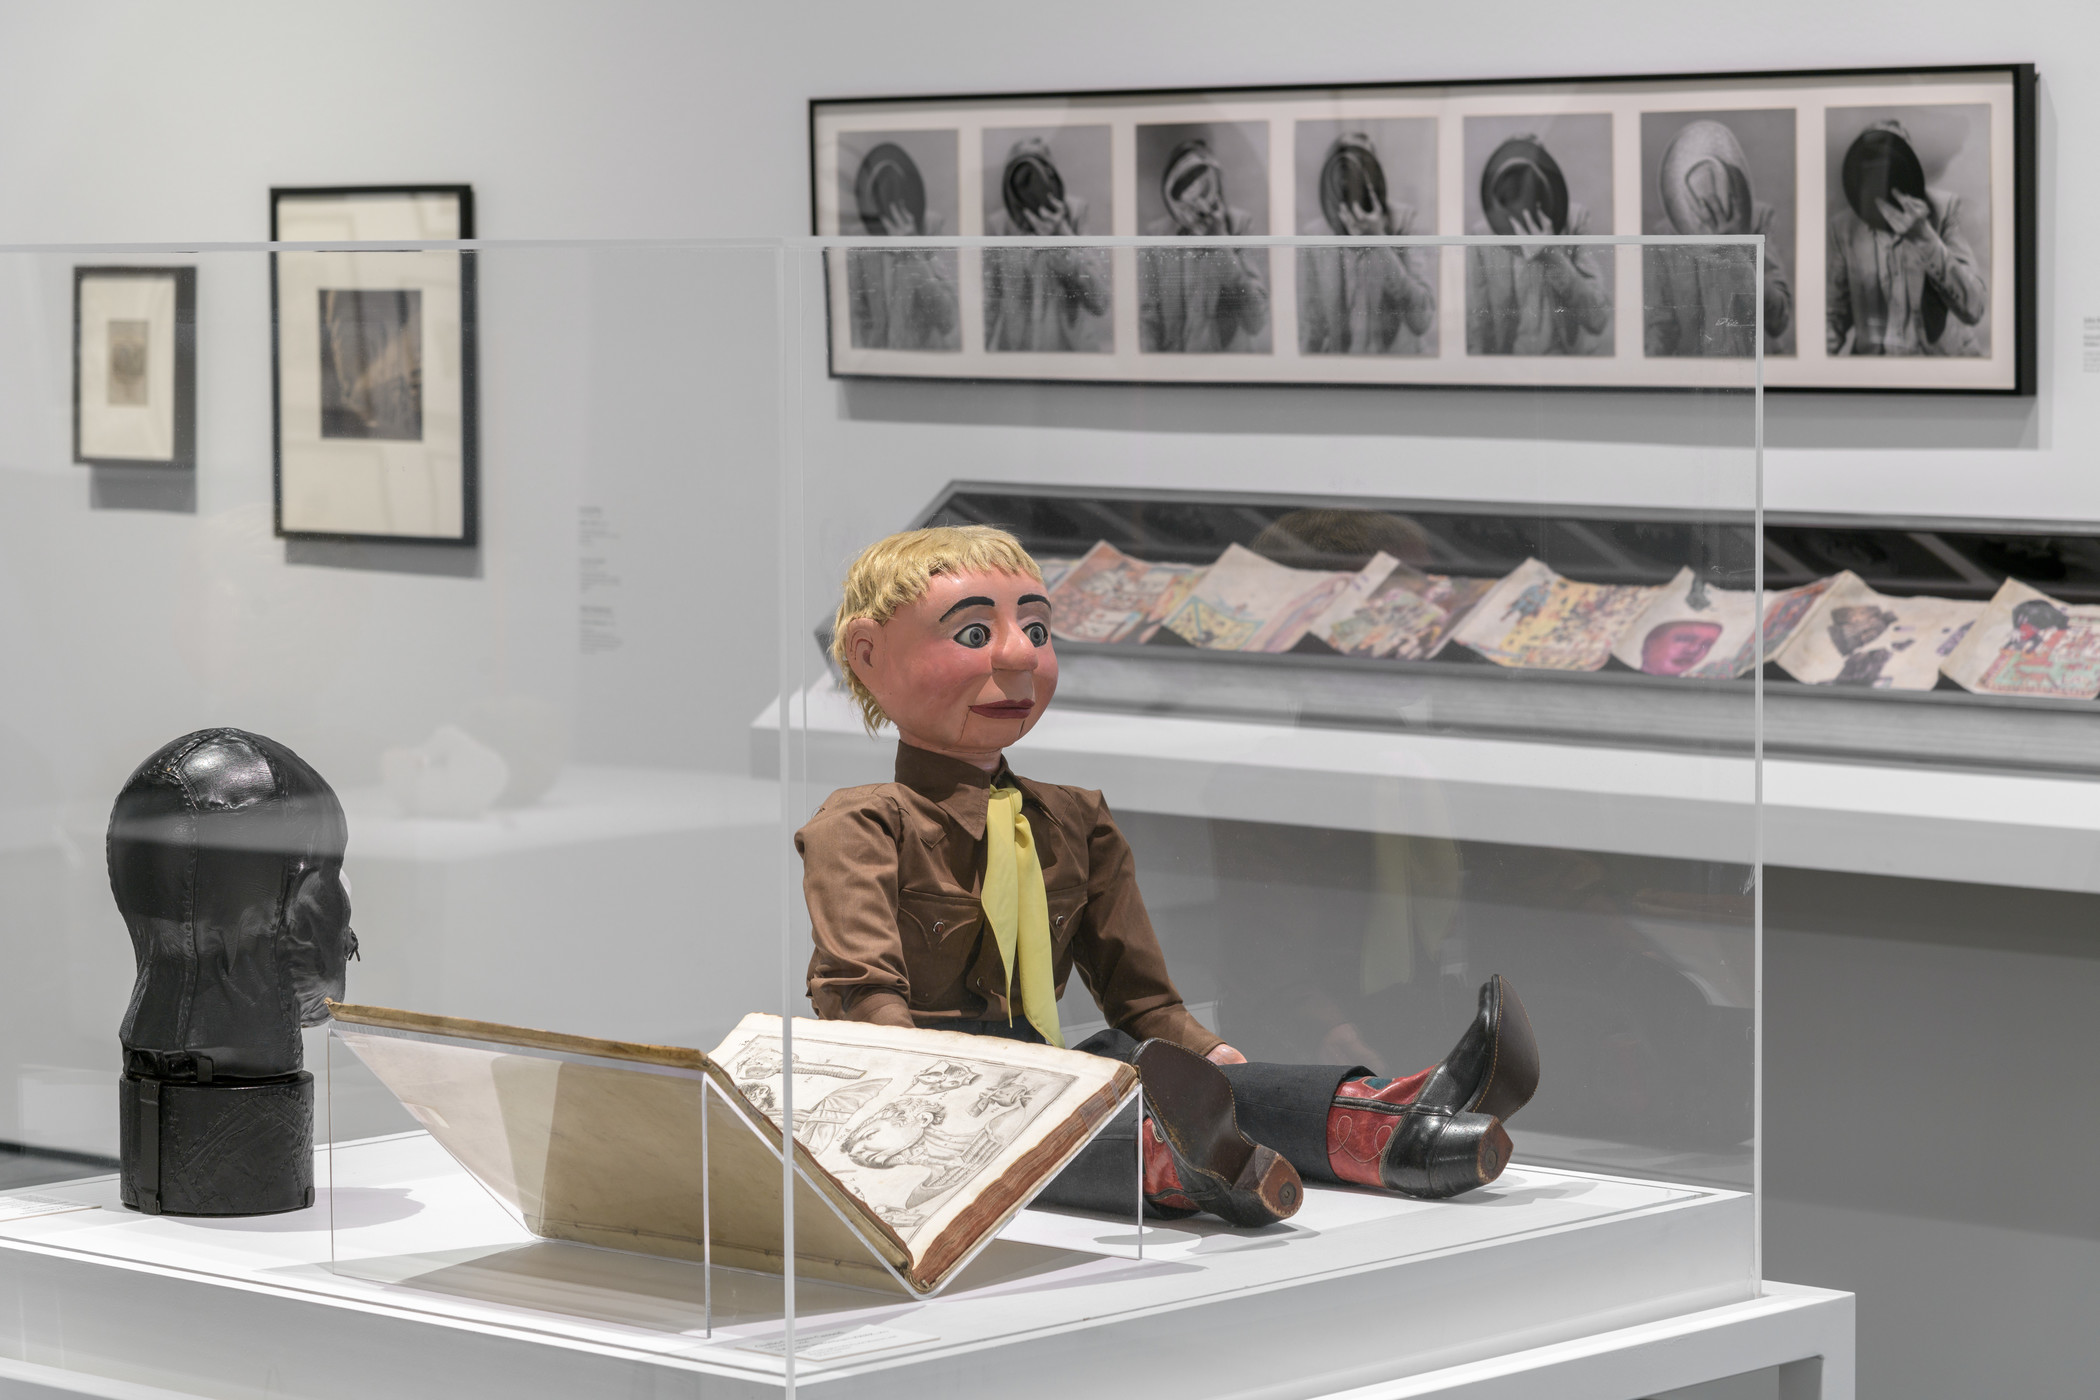 A ventriloquist dummy in a brown shirt, yellow tie, and red cowboy boots sits next to an open book and a black leather bust in a vitrine in a gallery, with framed photographs in the background 